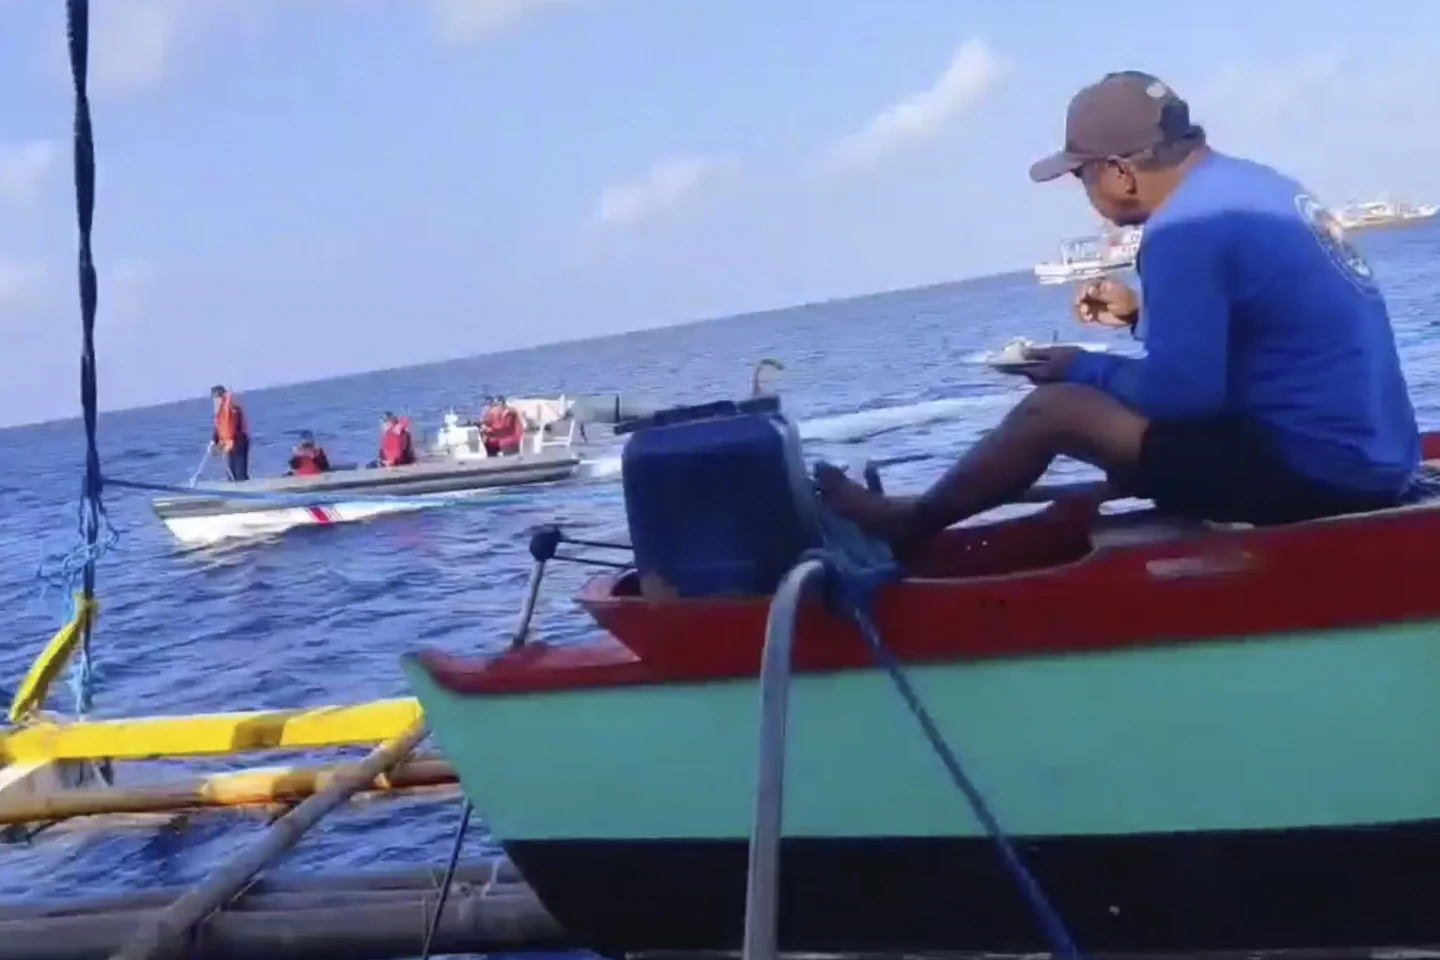 Filipino Fisherman to China’s Coast Guard on Disputed Shoal: `This Is Philippine Territory. Go Away’